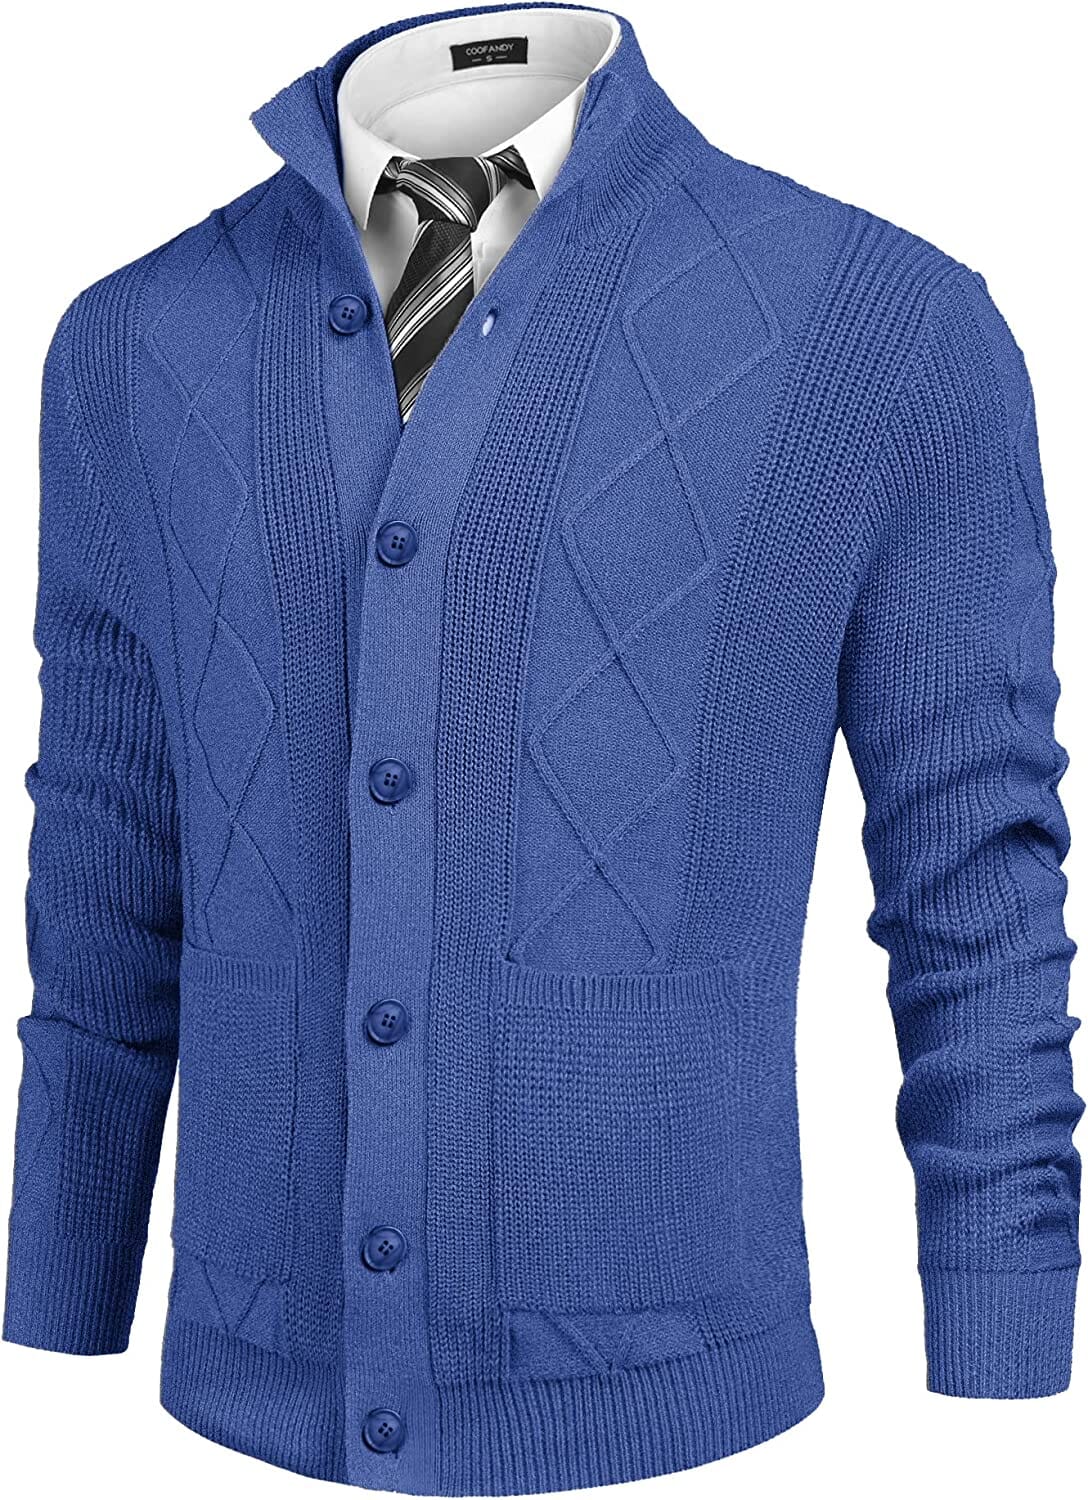 Casual Stand Collar Button Down Cardigan with Pockets (US Only) Cardigans COOFANDY Store Blue S 